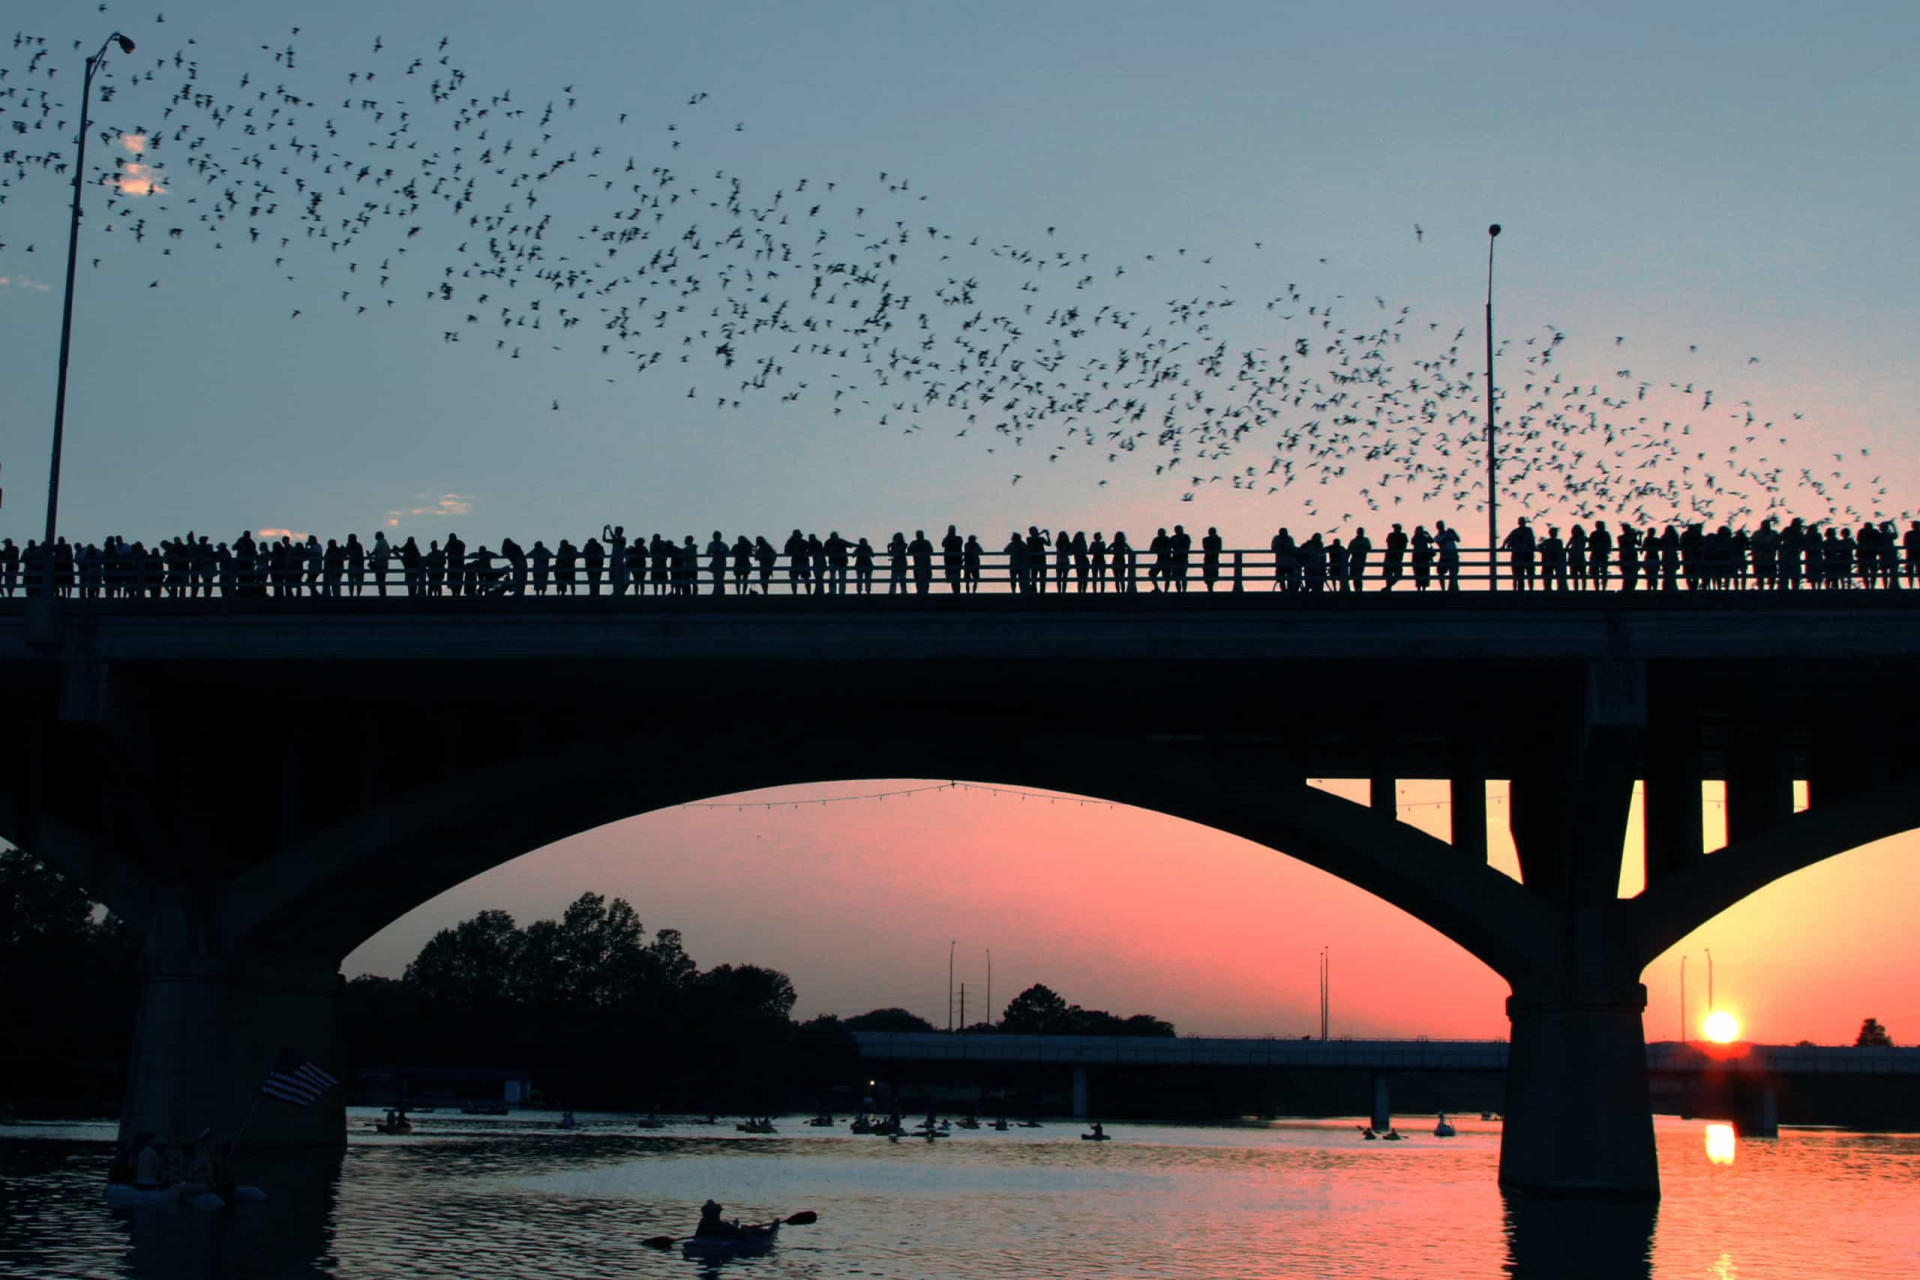 <p>Stand on the Congress Avenue Bridge on any summer night and watch wide-eyed as the world's largest urban bat colony emerges en masse into the evening sky.</p><p><a href="https://www.msn.com/en-us/community/channel/vid-7xx8mnucu55yw63we9va2gwr7uihbxwc68fxqp25x6tg4ftibpra?cvid=94631541bc0f4f89bfd59158d696ad7e">Follow us and access great exclusive content every day</a></p>